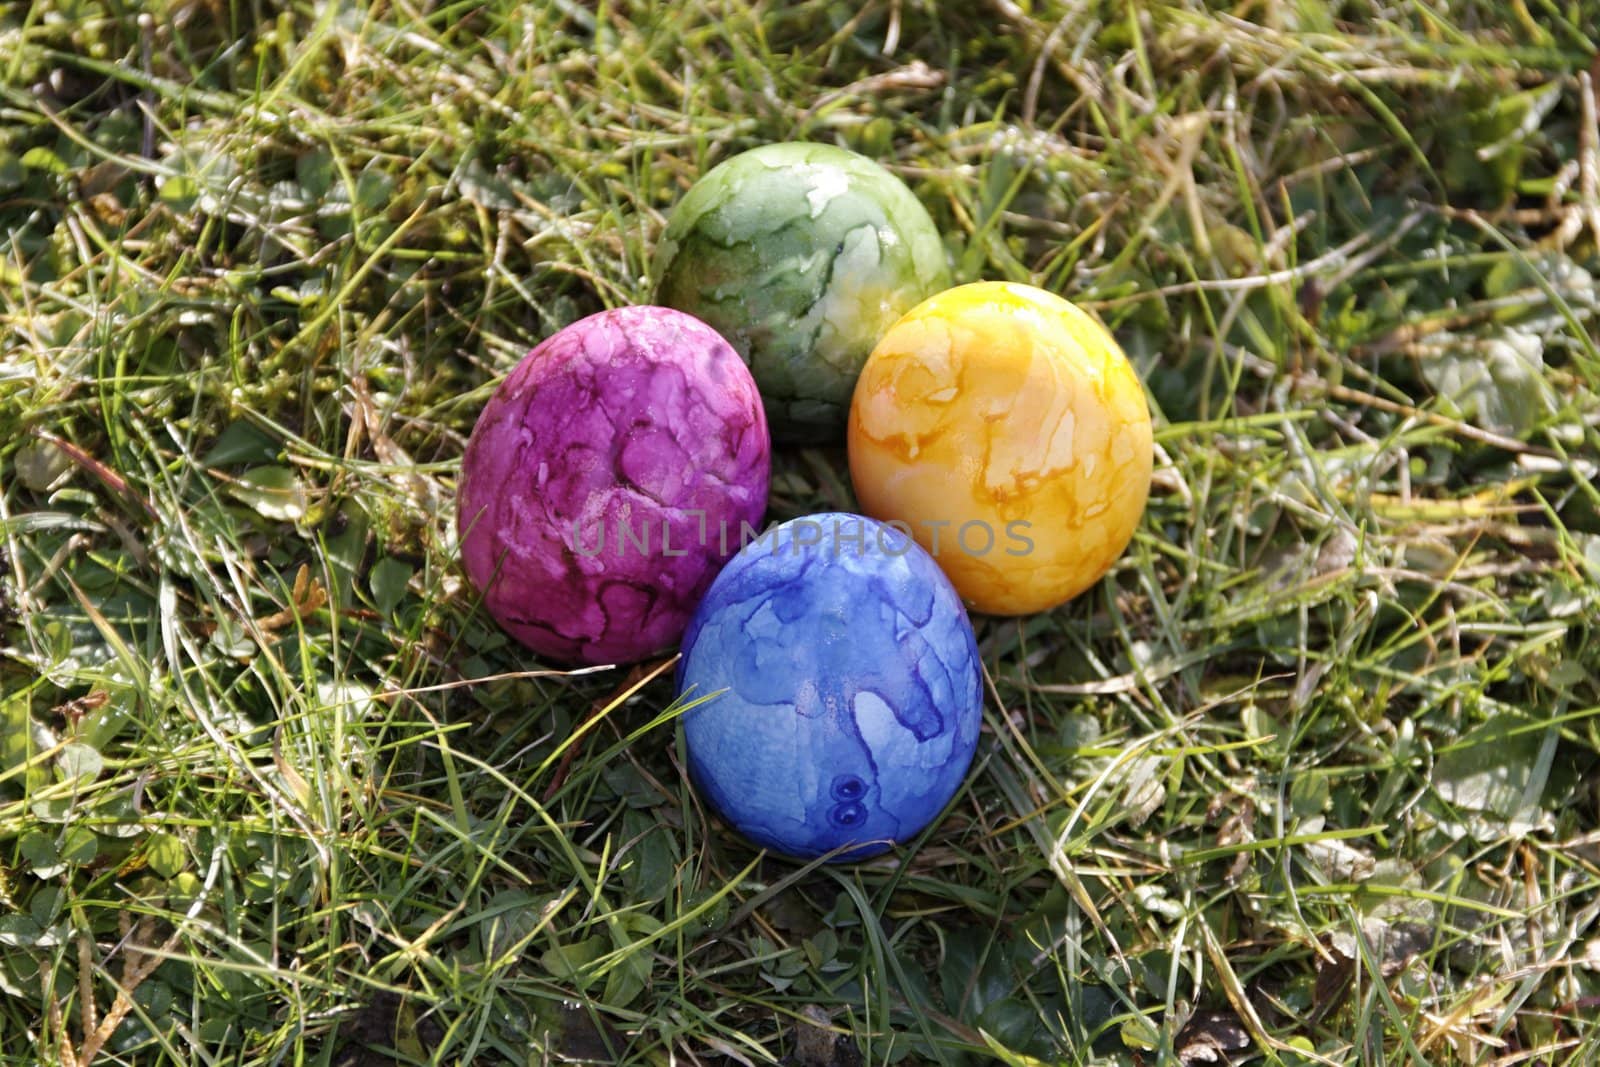 group of easter eggs on the grass